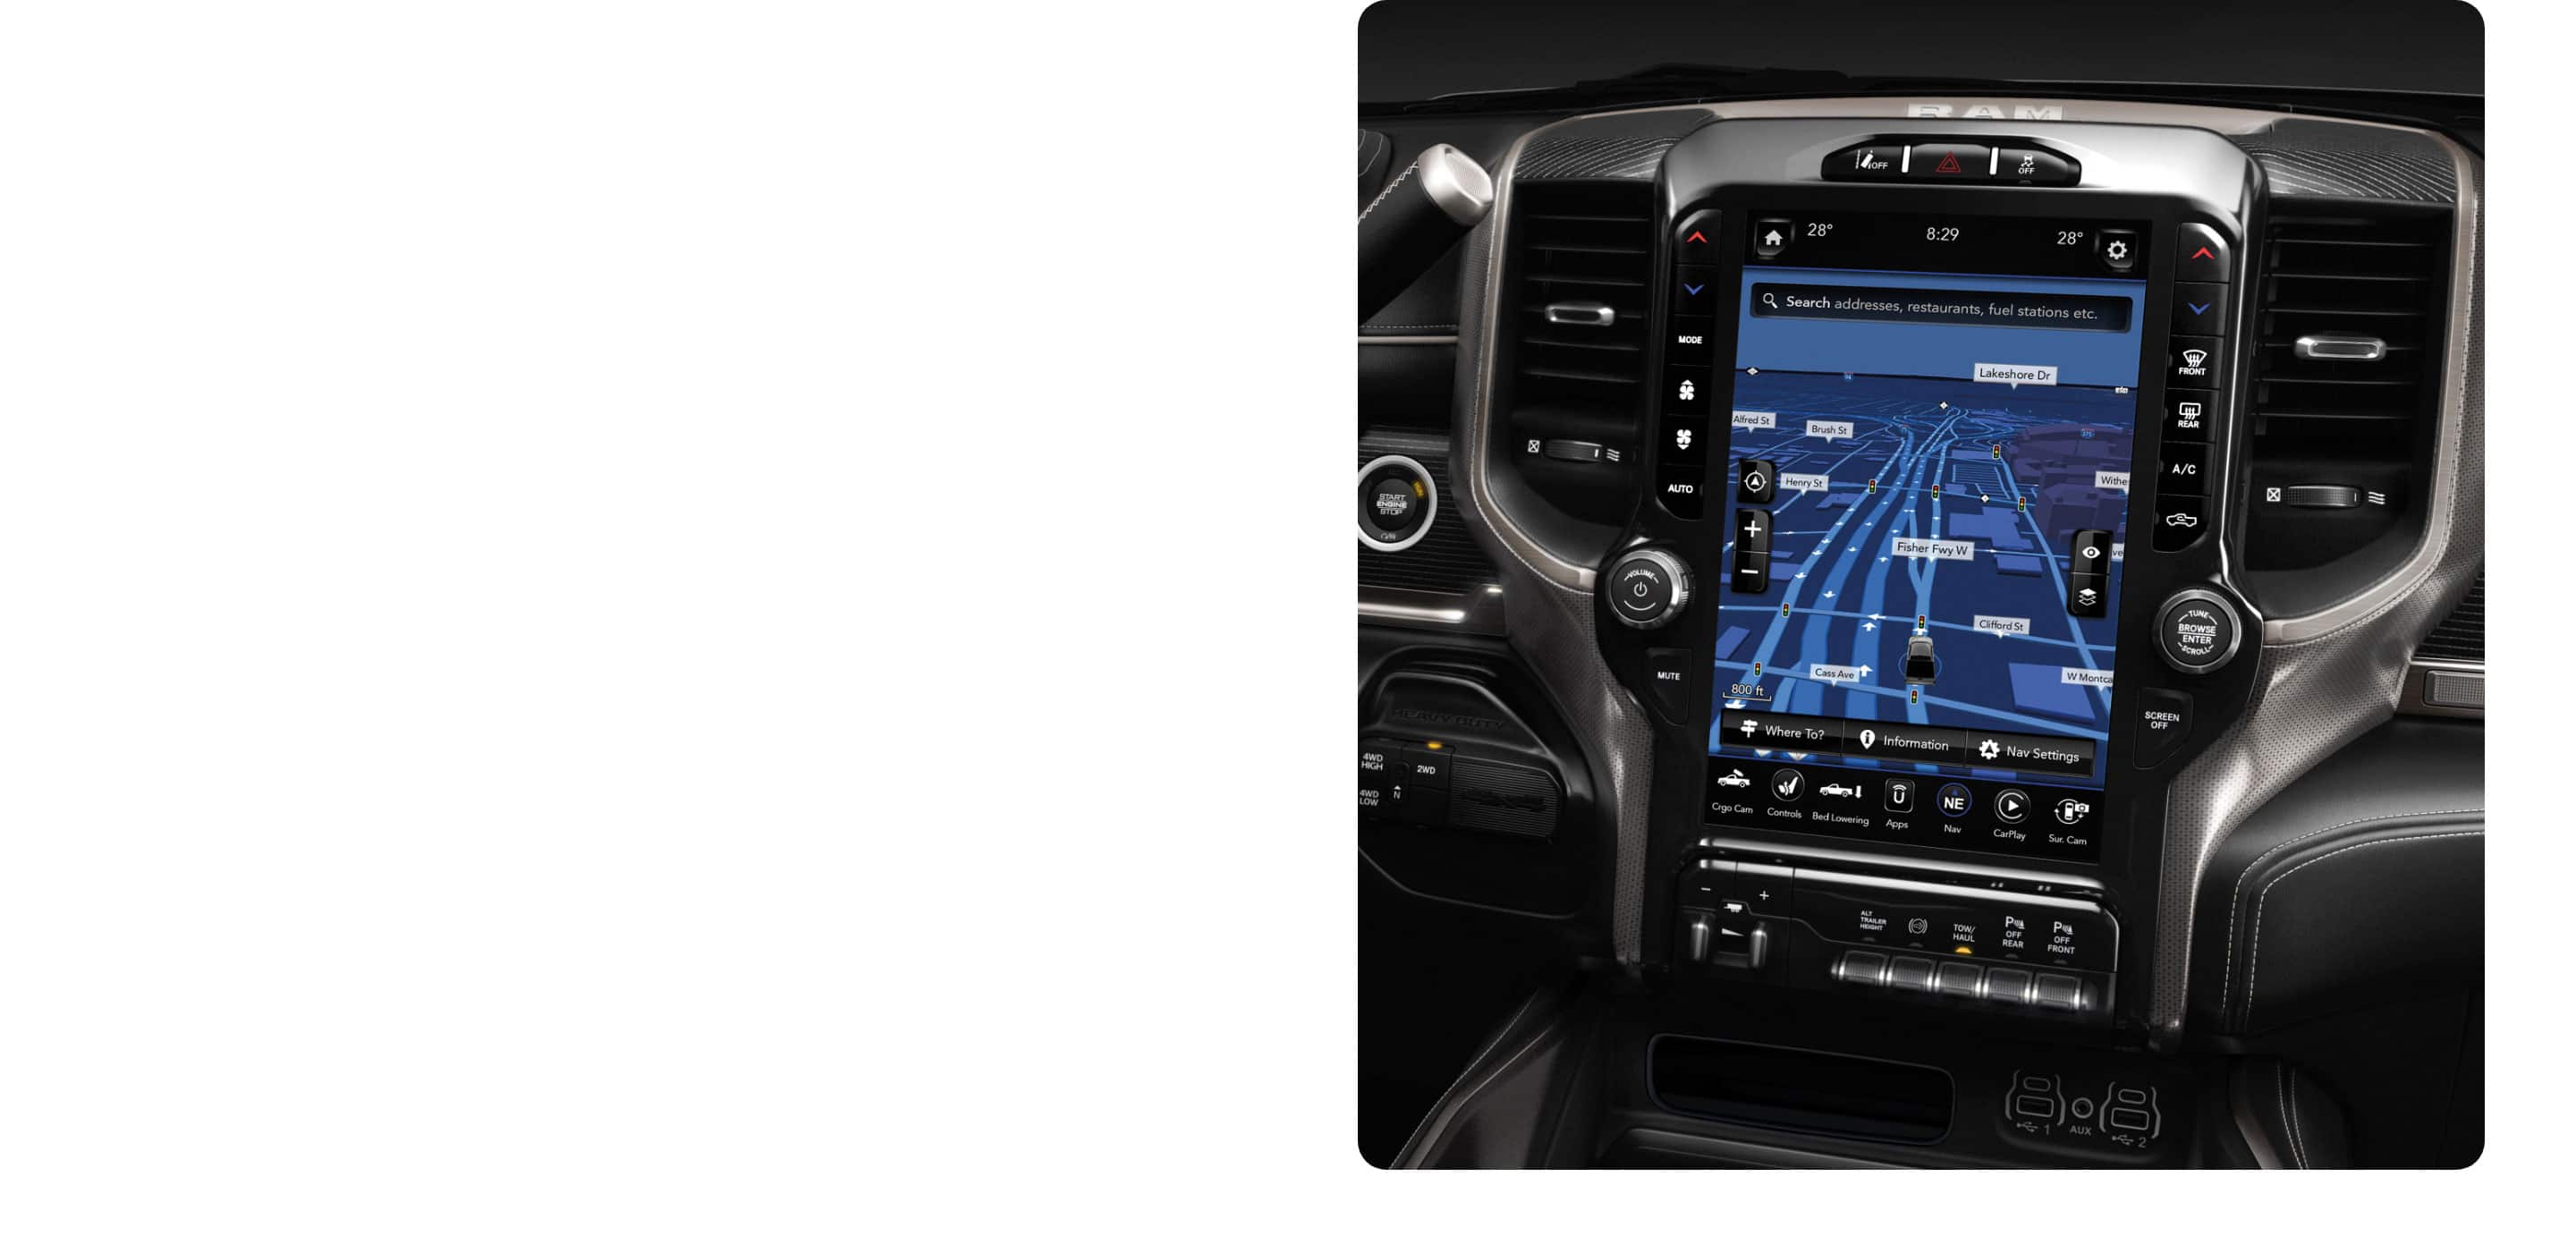 The 12-inch Uconnect touchscreen in the 2021 Ram 2500 displaying a navigation route map onscreen.